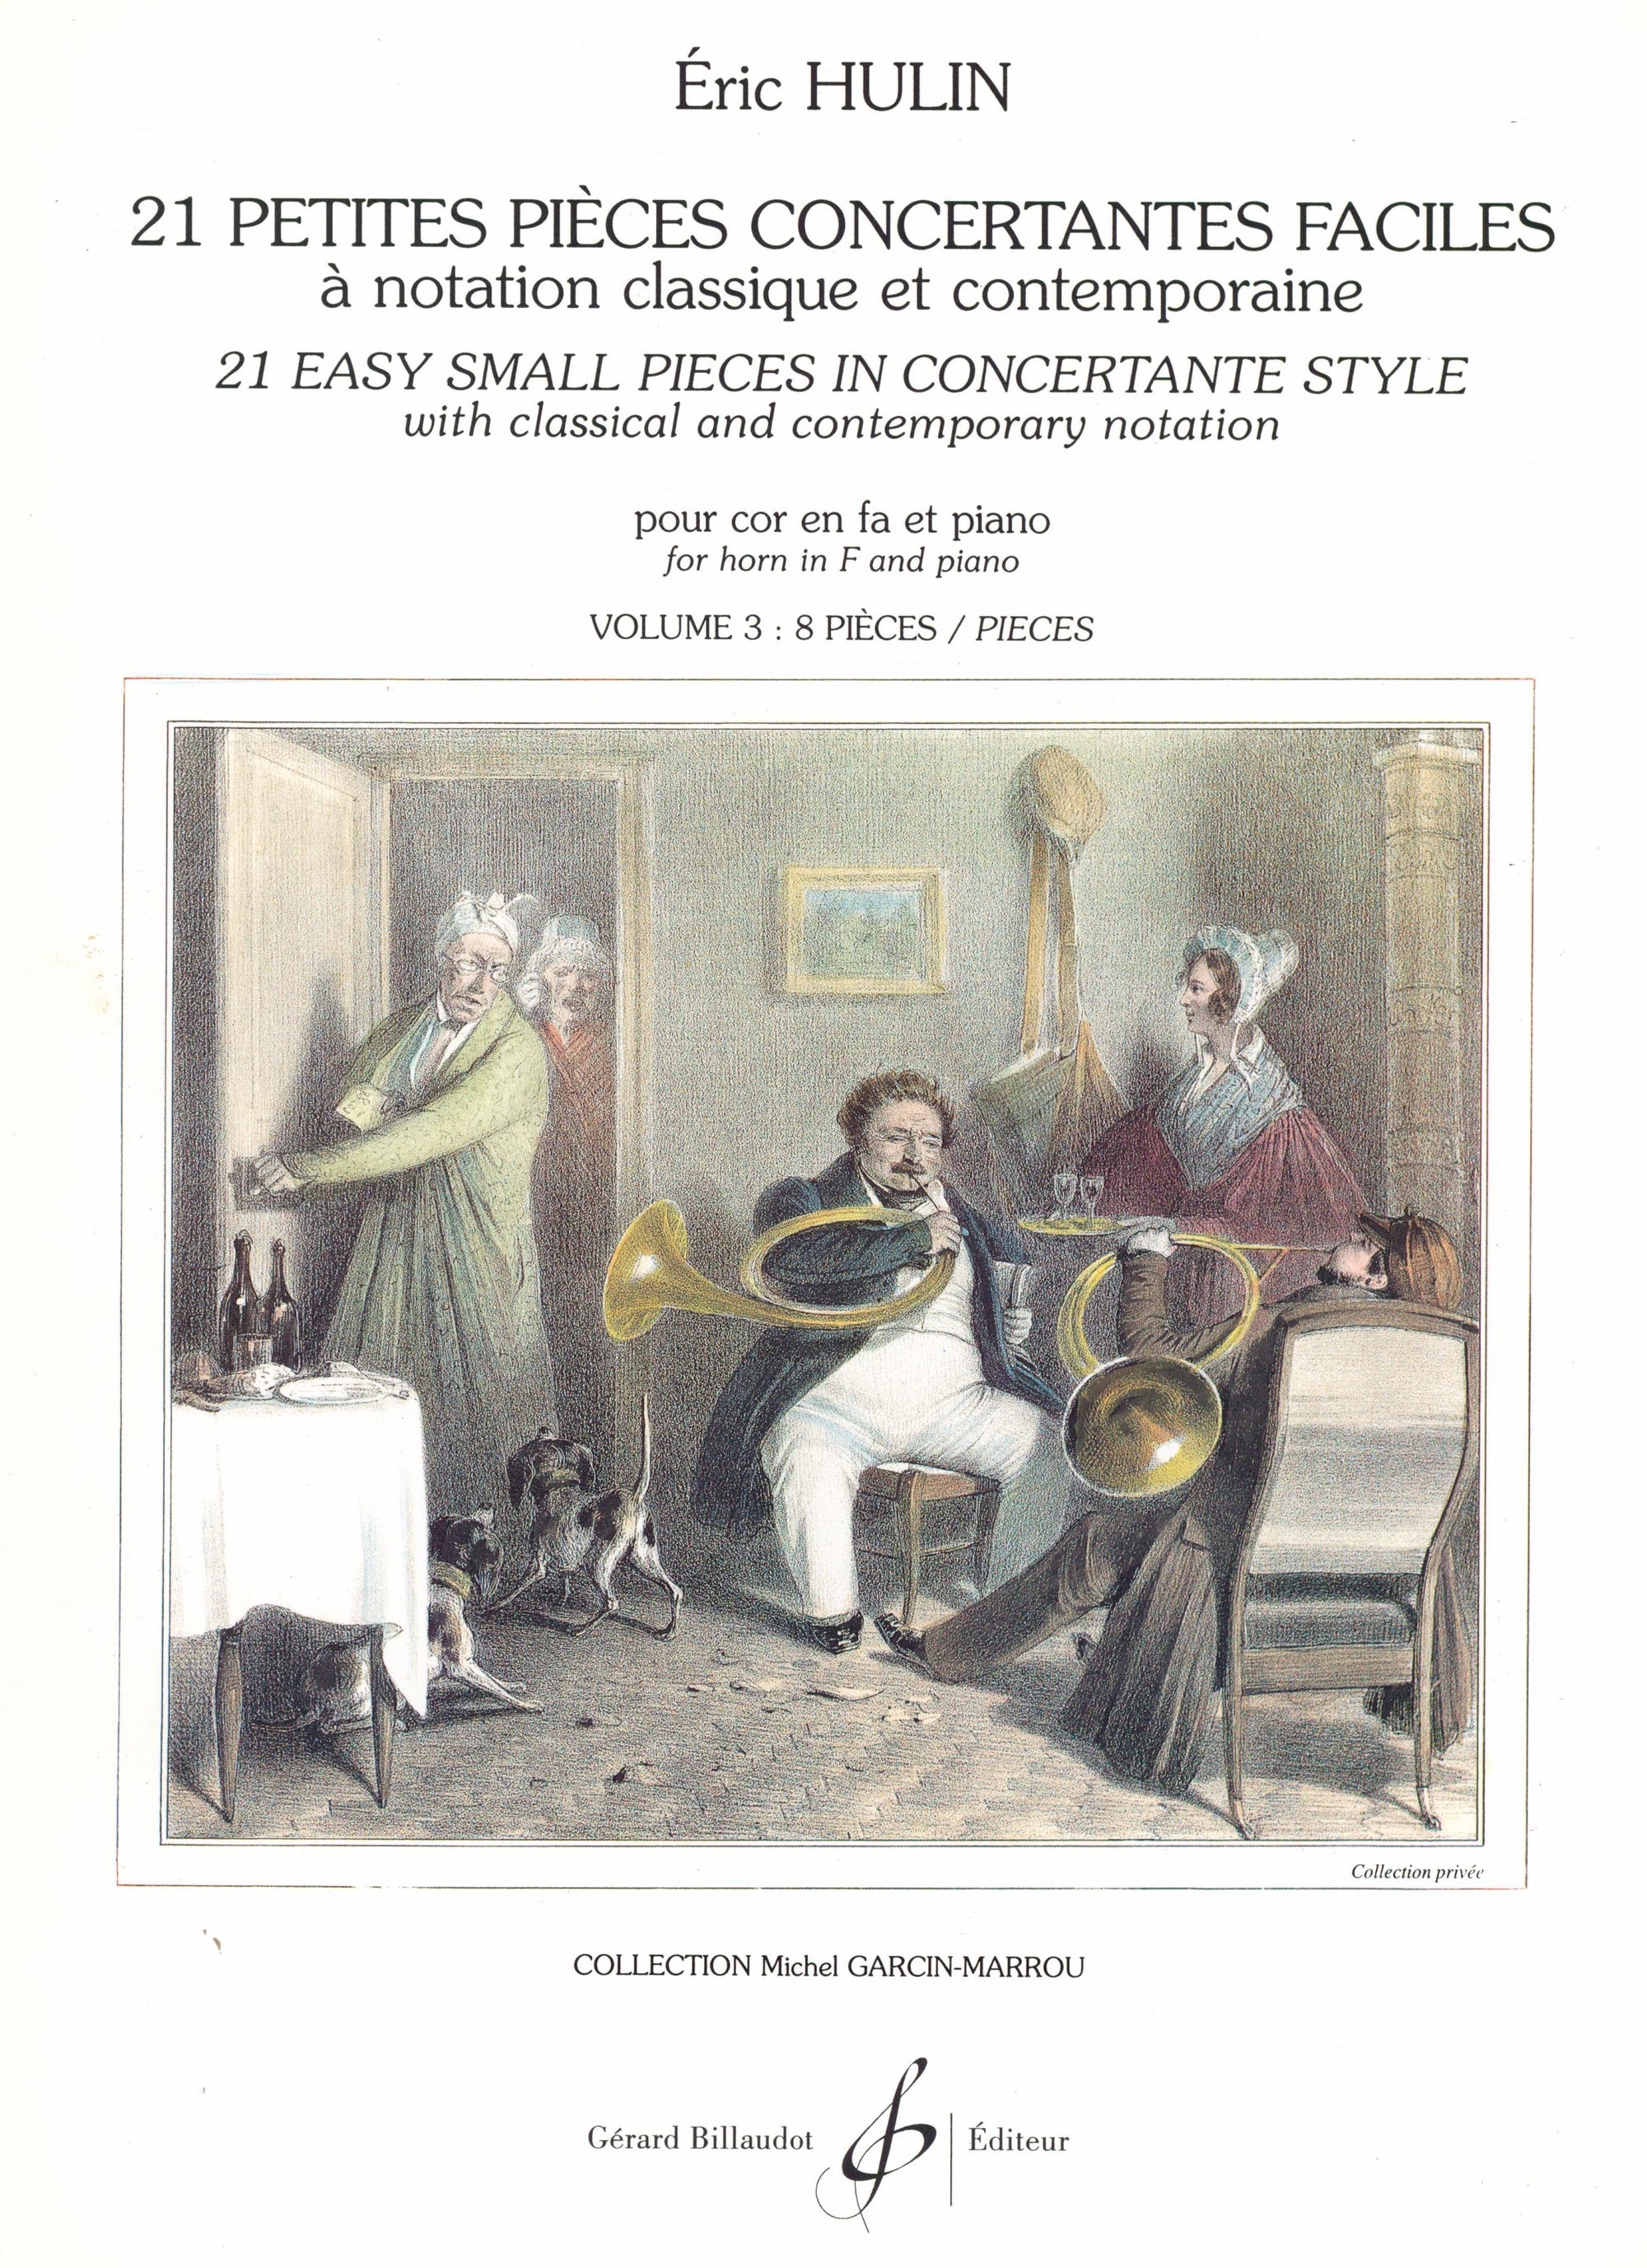 Hulin: 21 Easy Small Pieces in Concertante Style - Volume 3